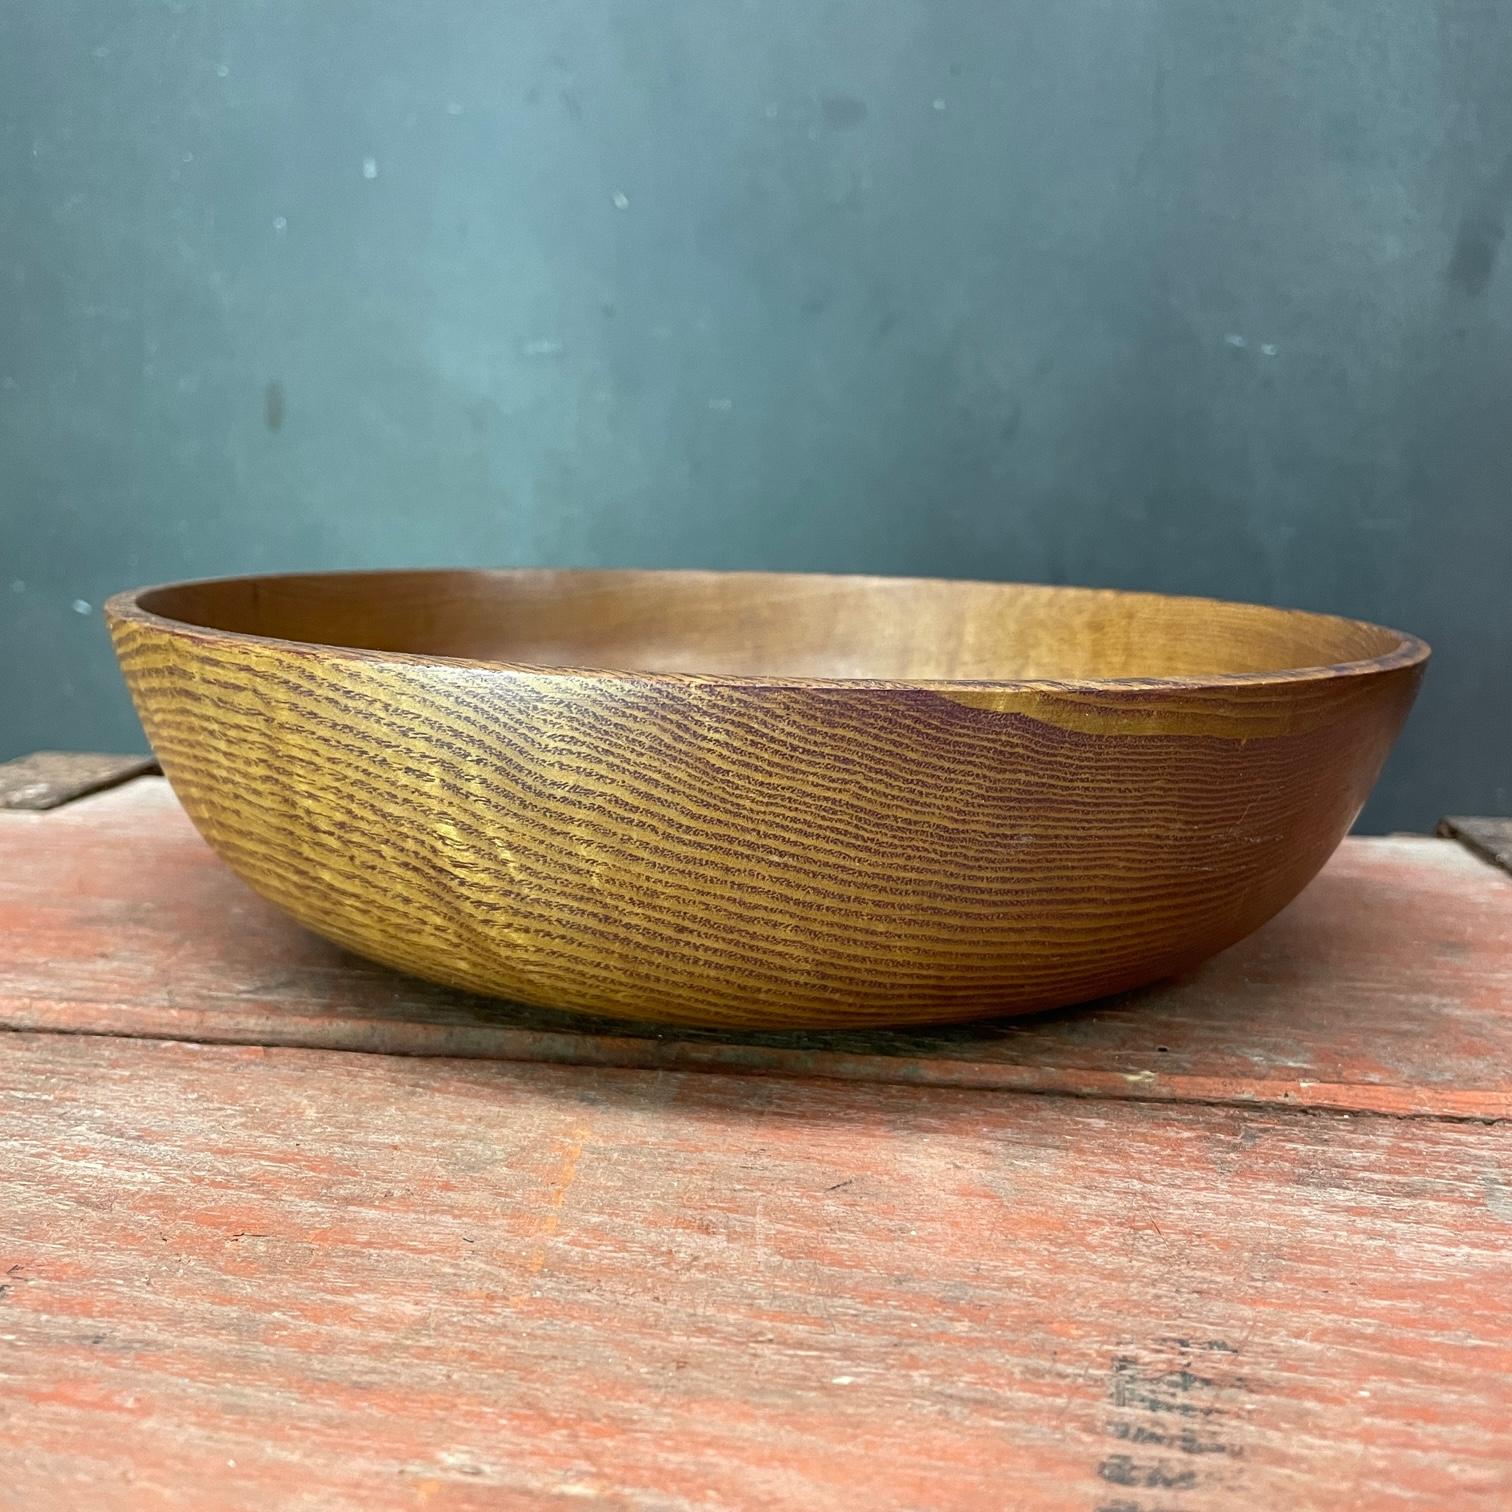 Wonderfully precise turned wood bowl, understated centerpiece or fruit bowl. Simple almost organic form. 10 inch diameter. No makers markings.